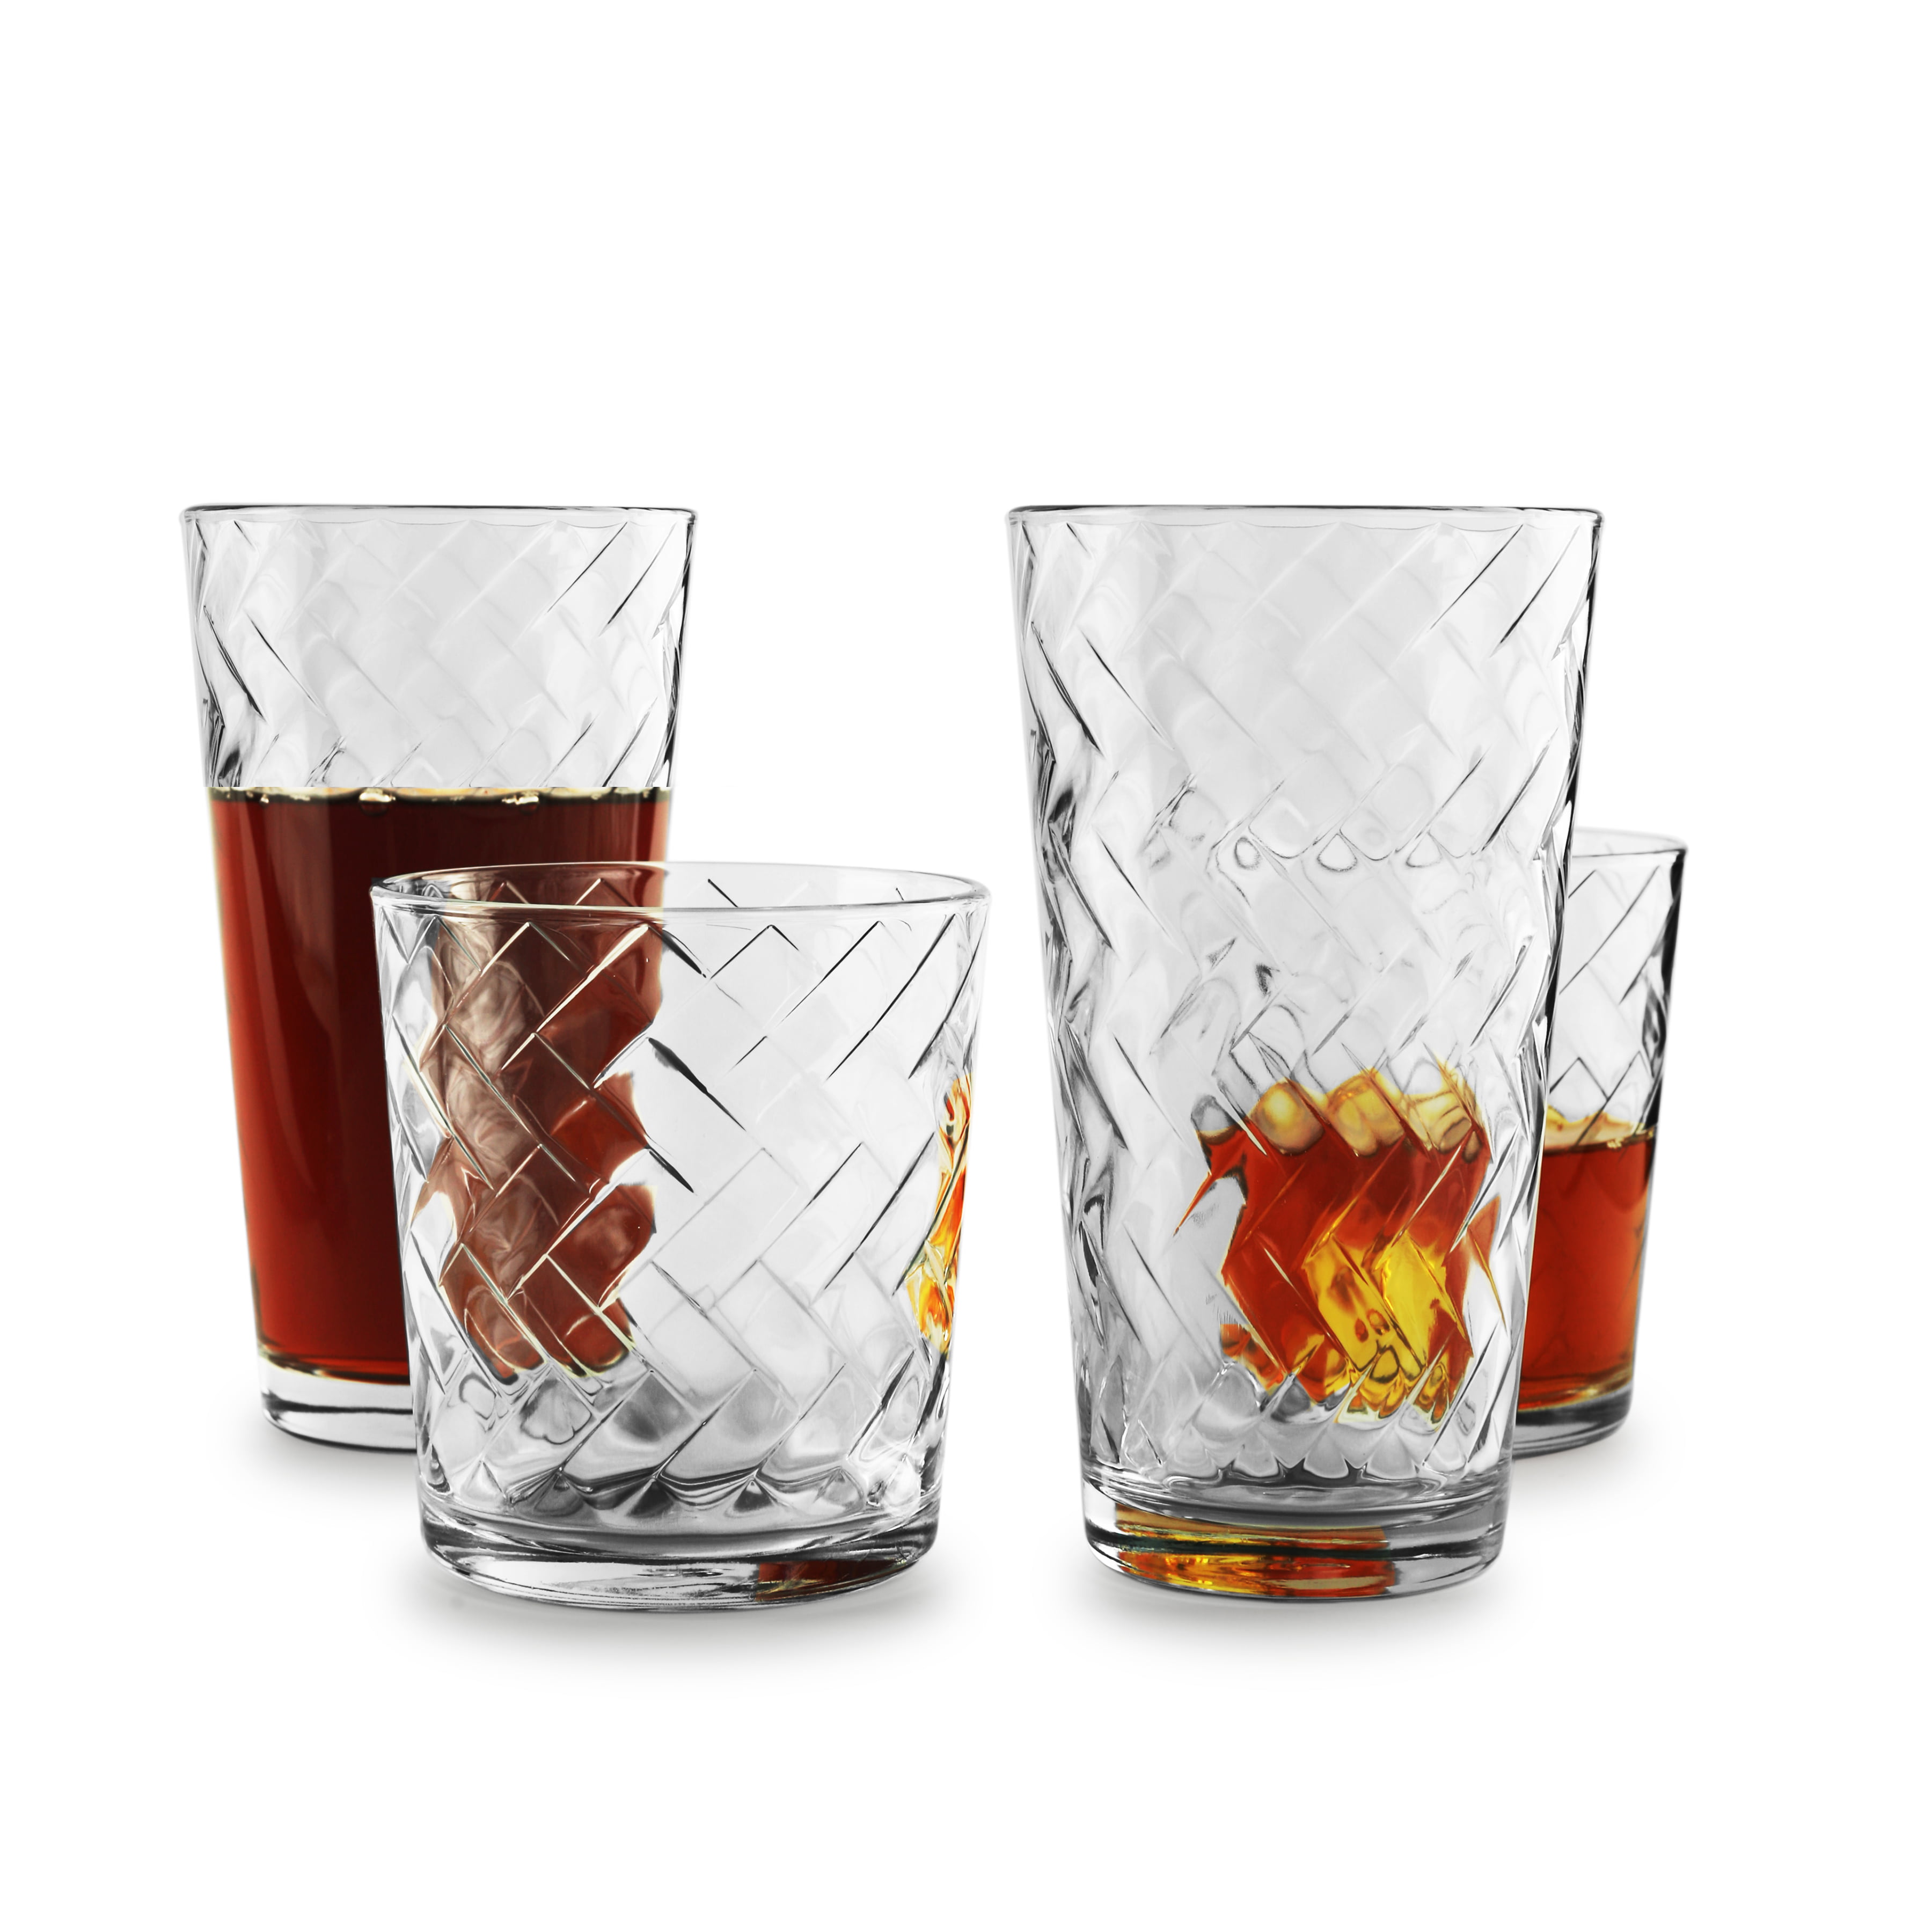 Set of 16 Heavy Base Ribbed Durable Drinking Glasses Includes 8 Cooler Glasses 17oz and 8 Rocks Glasses 13oz